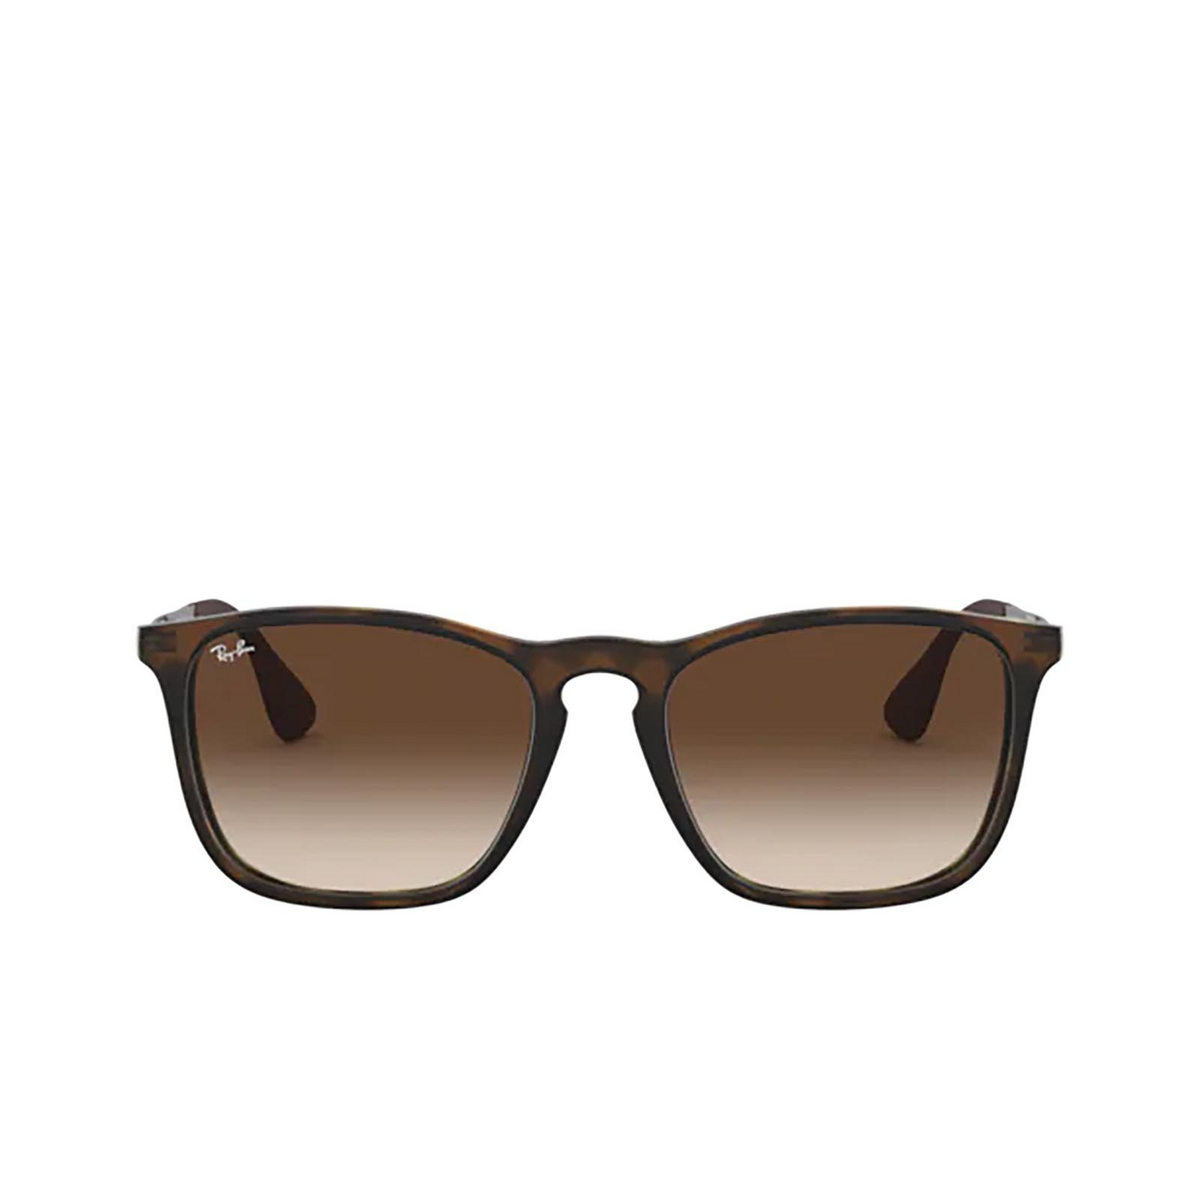 Ray-Ban CHRIS Sunglasses 856/13 Havana Rubber - front view